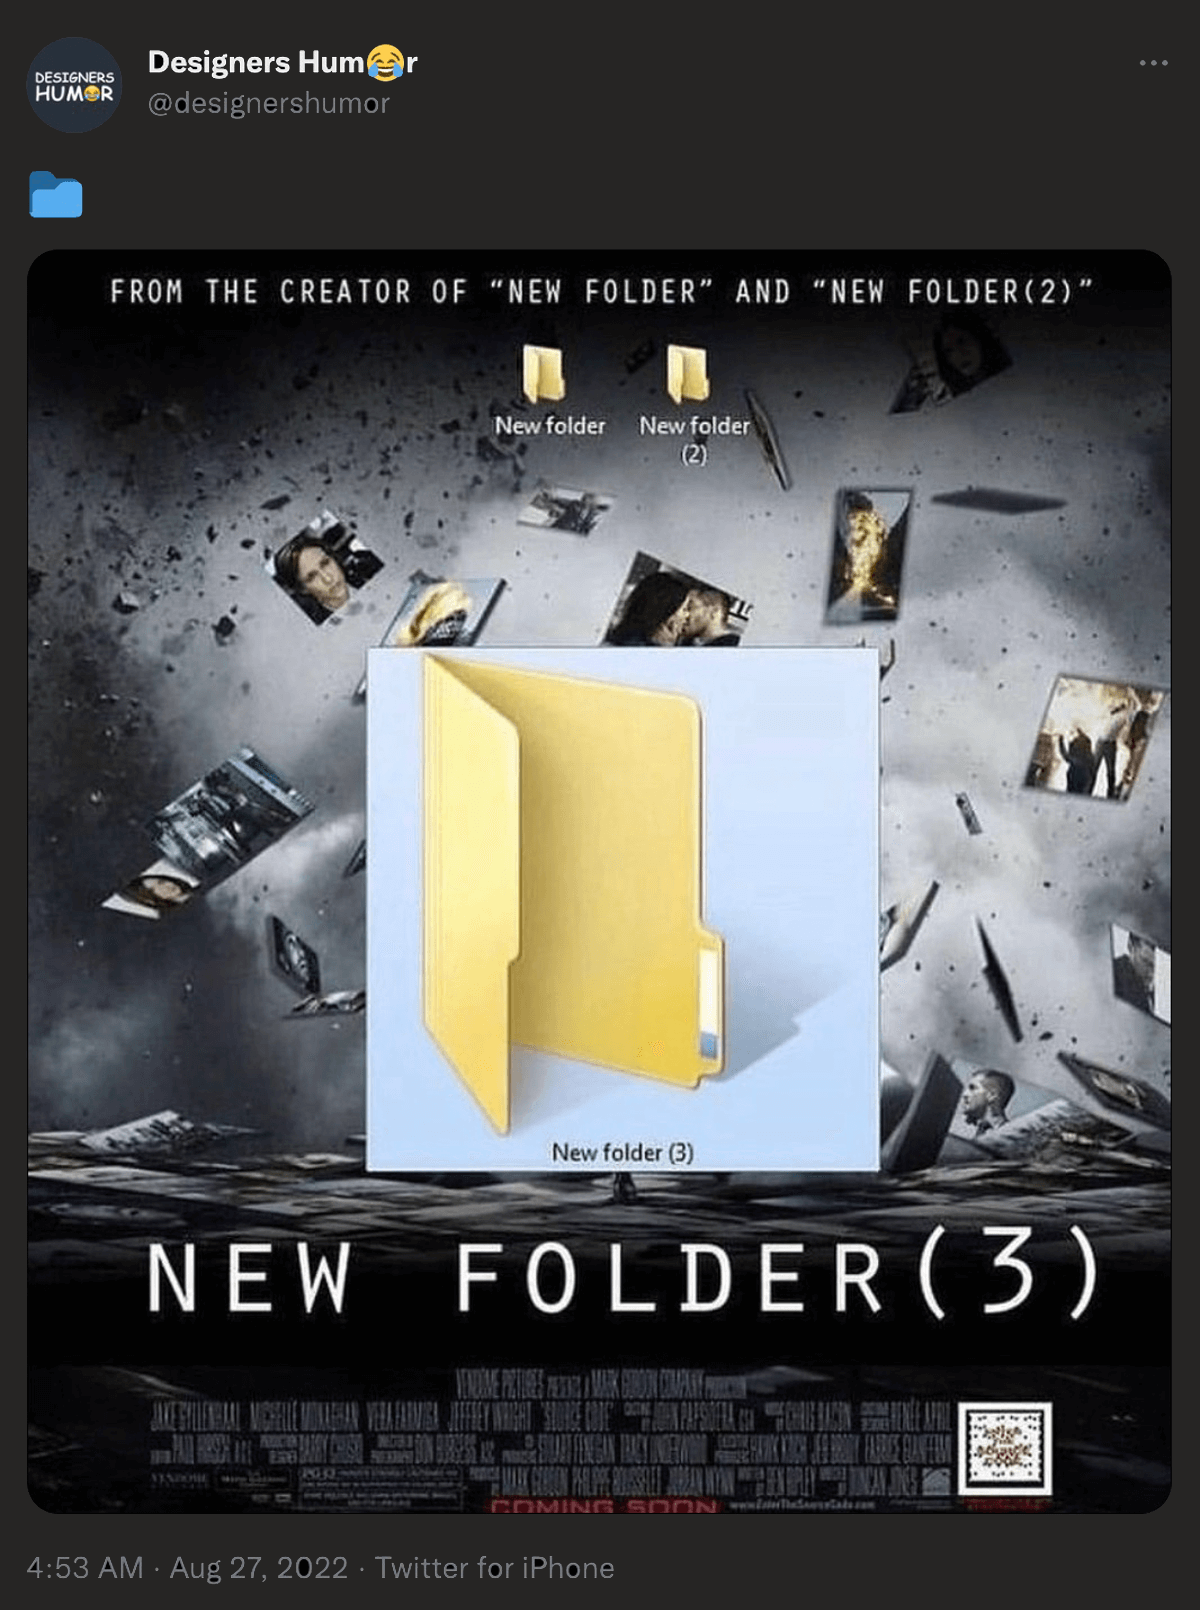 @designershumor on twitter: a movie poster that says From the creator of New Folder and Folder(2) comes Folder(3)